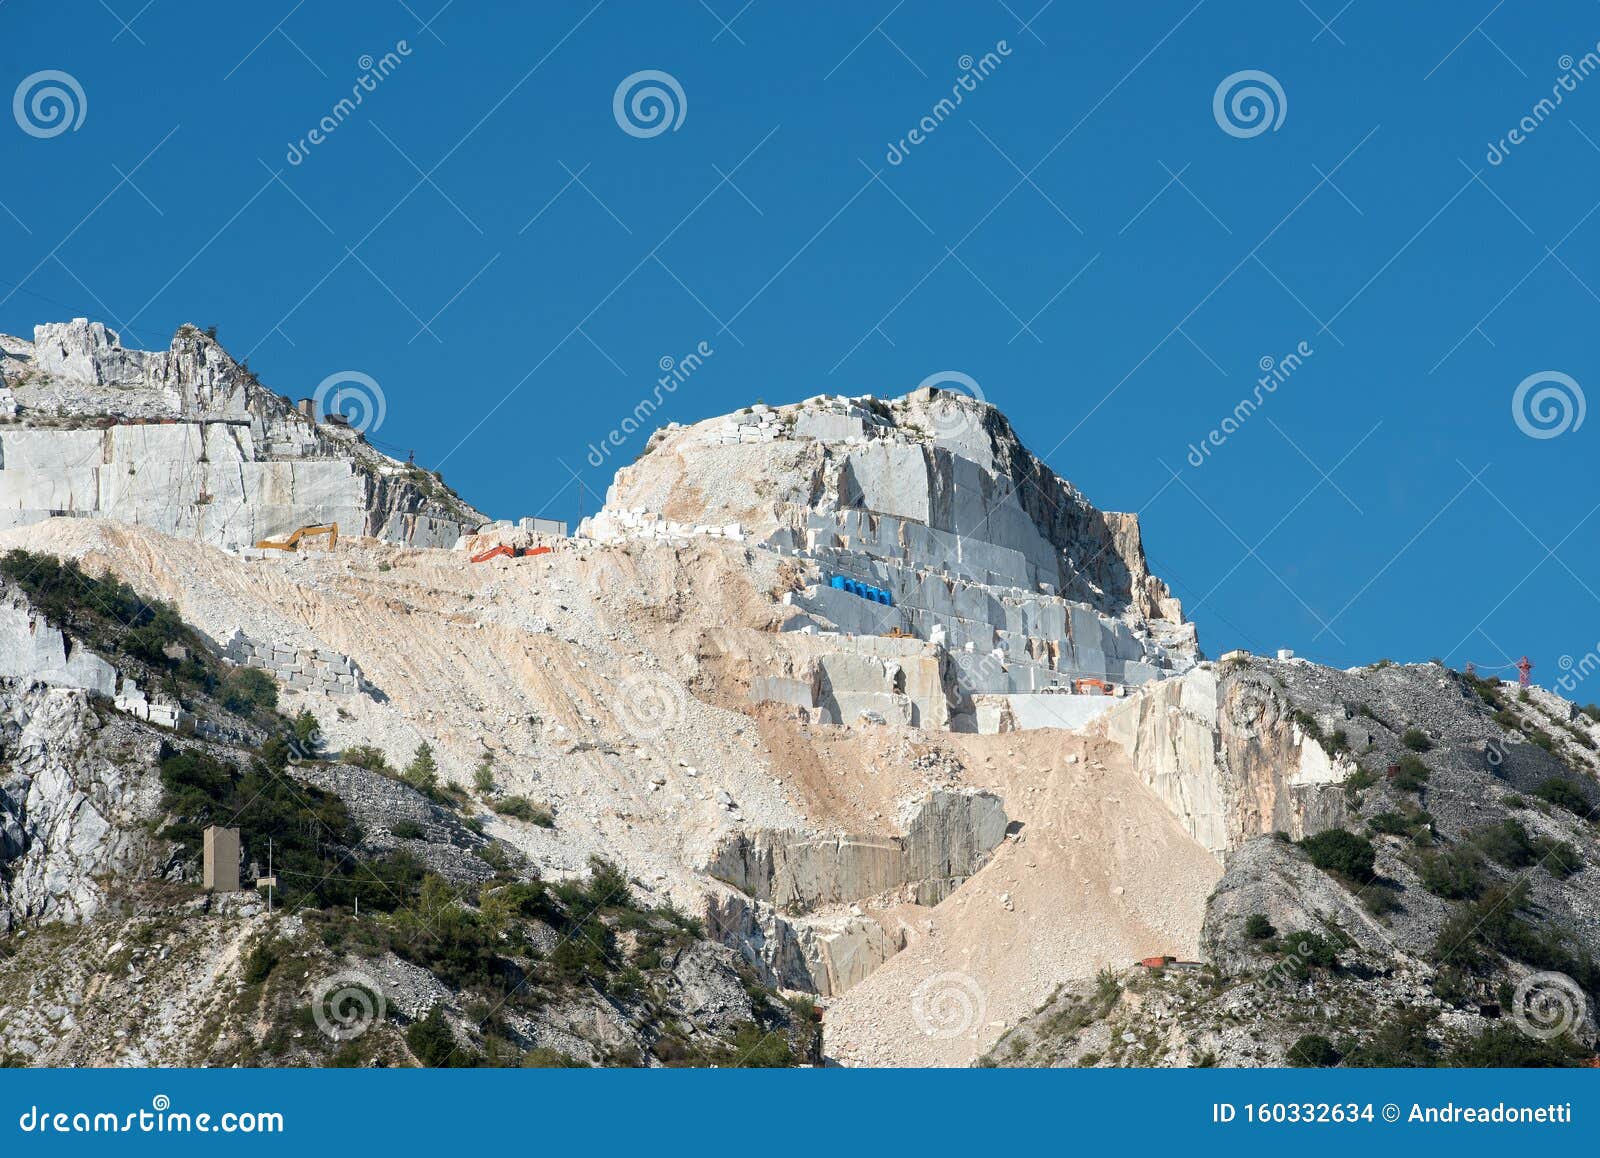 View Of An Open Cast Carrara Marble Mine  Stock Photo 